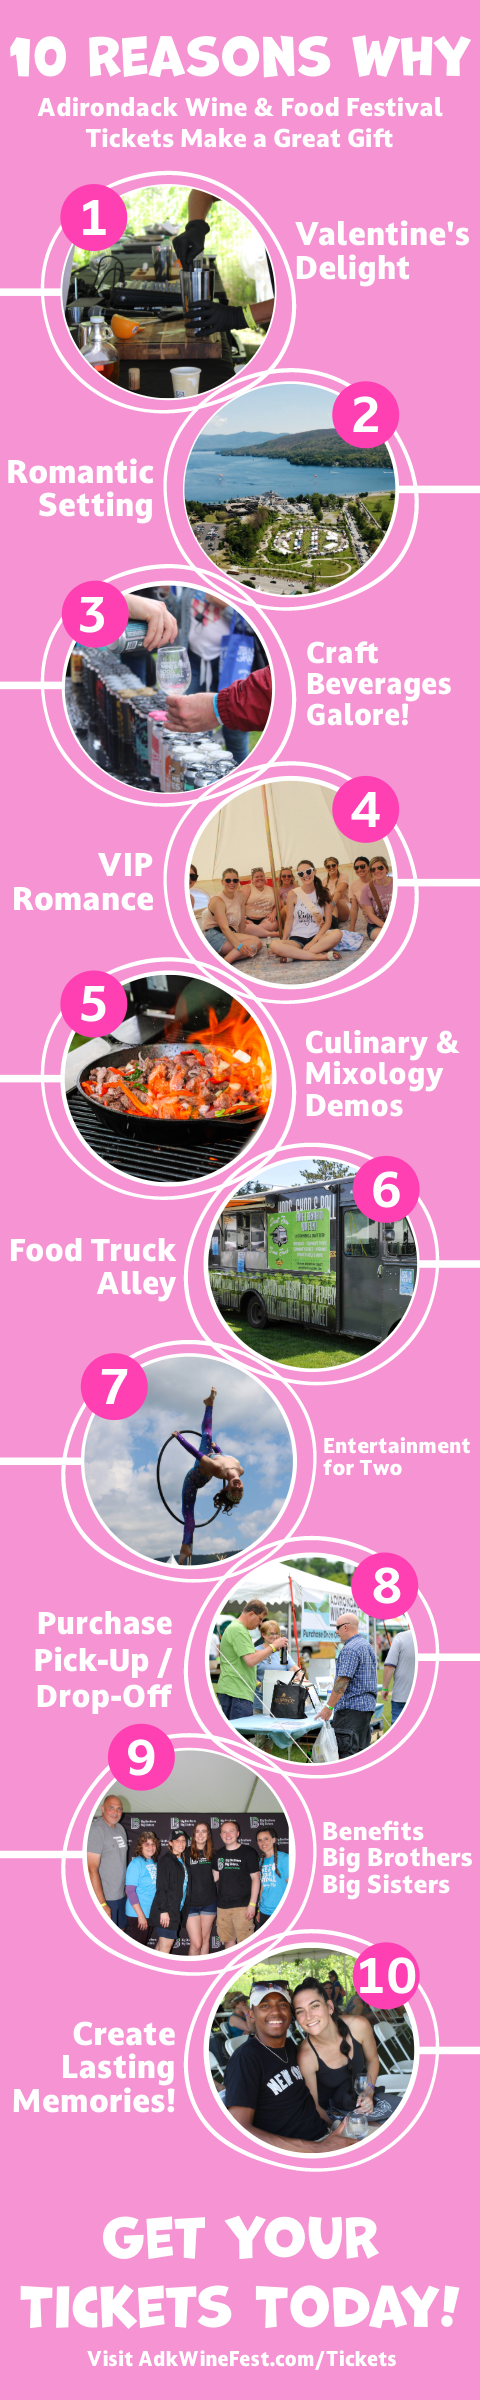 Graphic of the 10 reasons why you should buy tickets to ADK wine and food fest as a gift